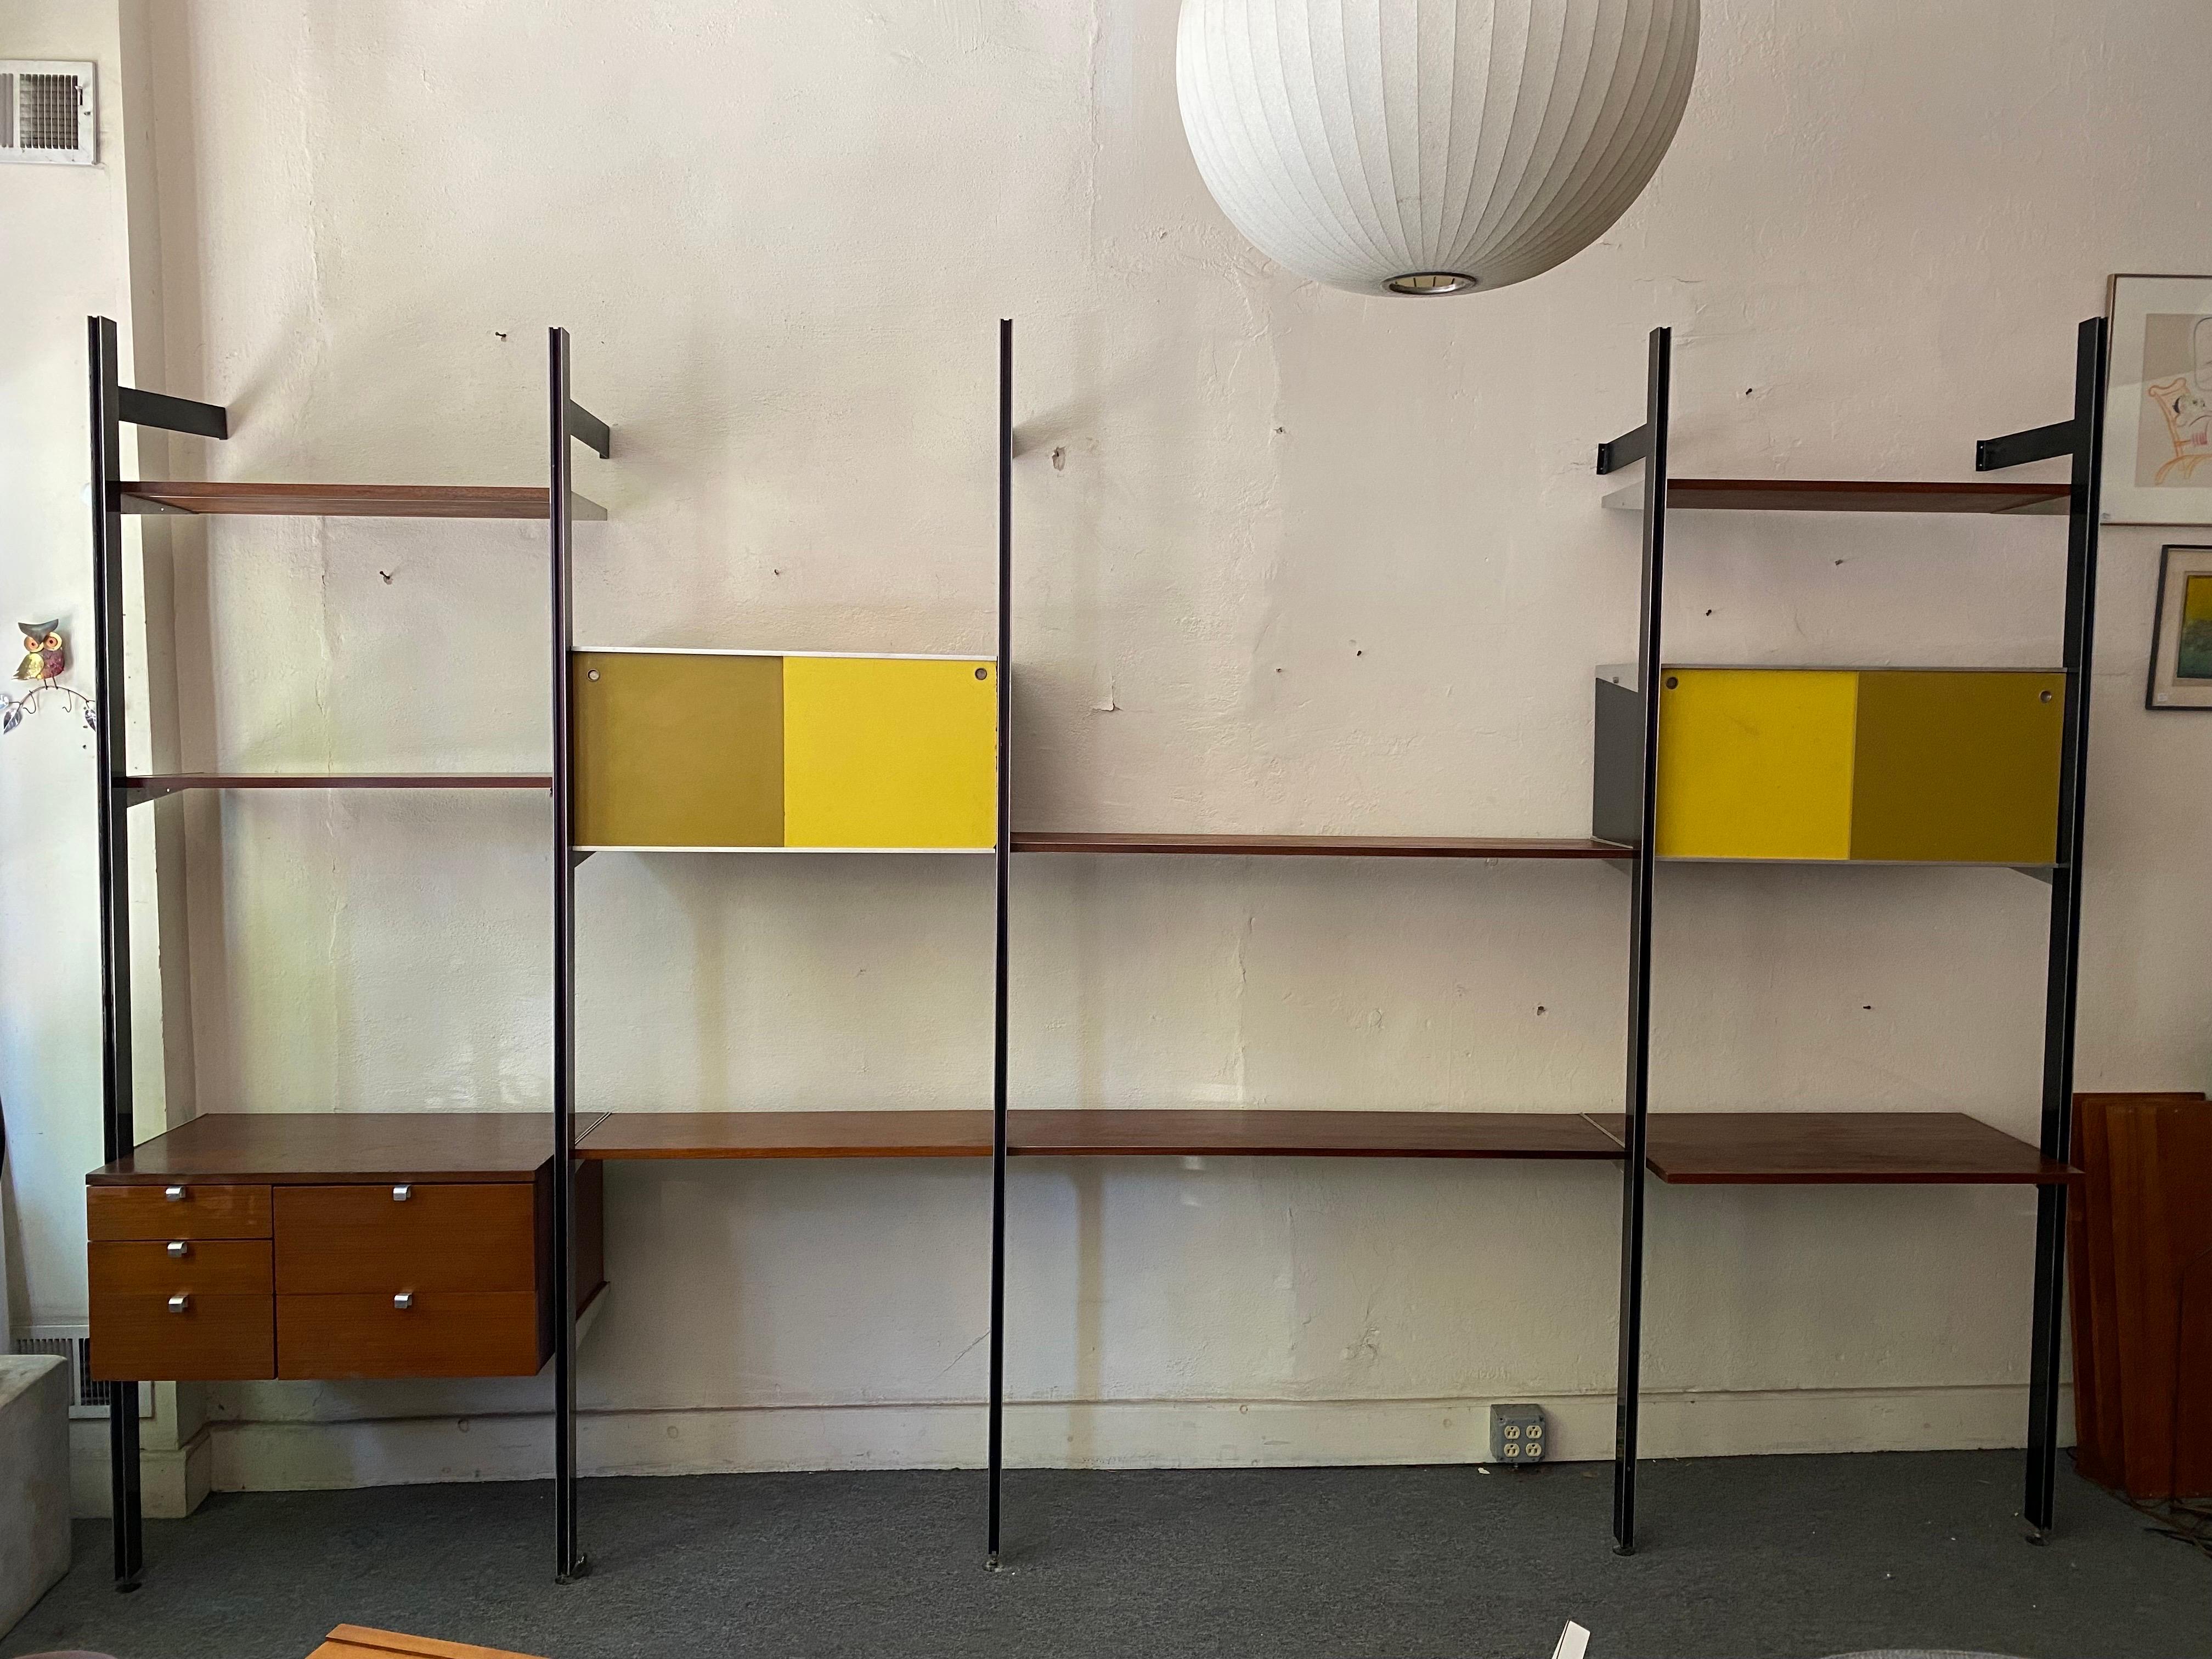 George Nelson Comprehensive Storage System CSS for Herman Miller Furniture. Such a useful and Great Design! All the weight hangs from the front poles so always an amazing sturdy Unit! Set consists of:

1 Cabinet with pull out drawer for